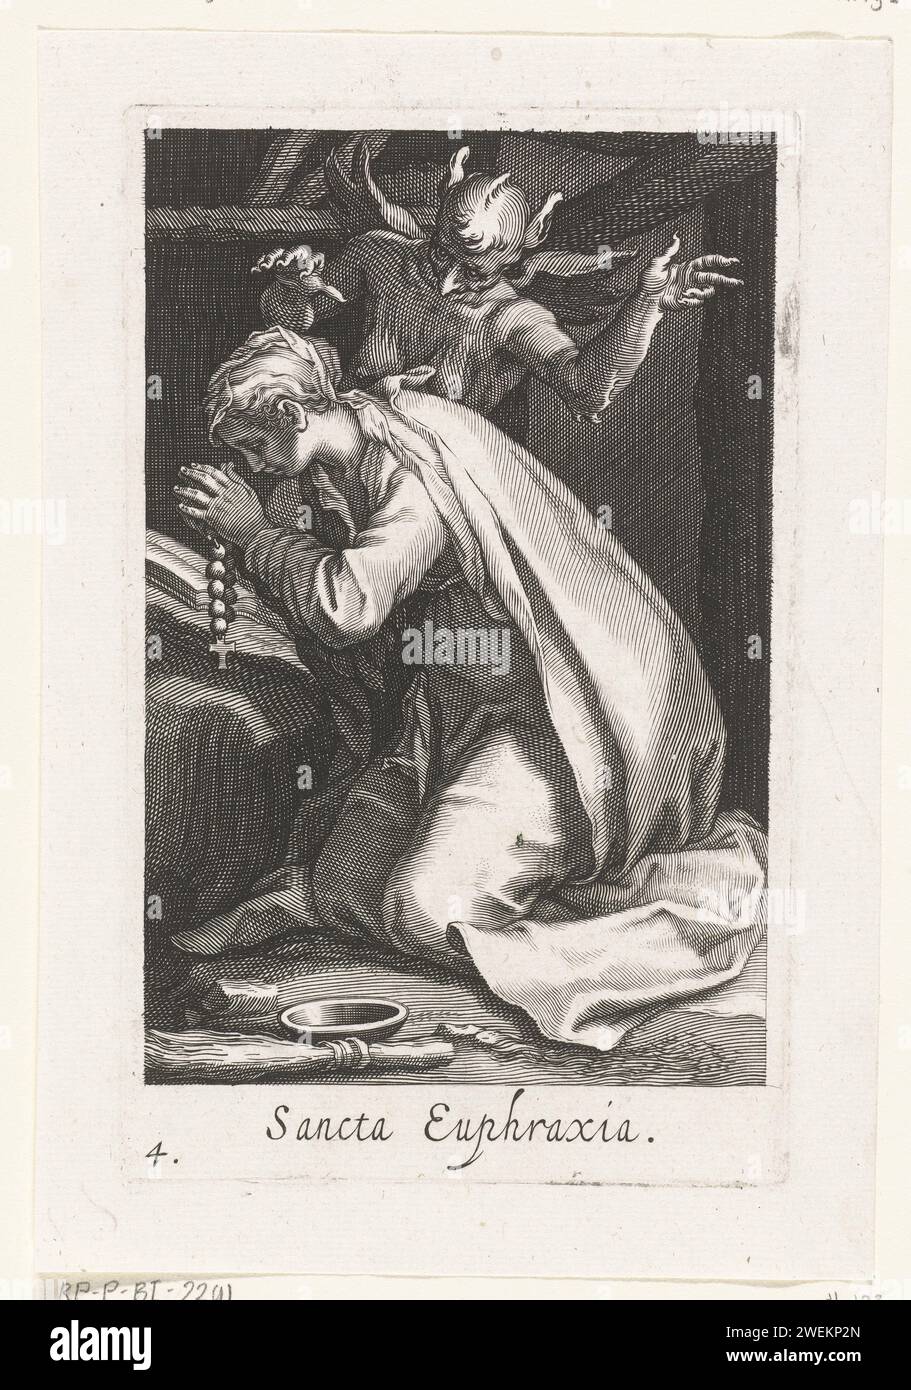 Holy Euphrasia of Constantinople as a recluse, Boëtius Adamsz. Bolswert, after Abraham Bloemaert, 1619 print The holy Euphrasia of Constantinople kneels in prayer her recluse cell while a devil tries to tempt her.  paper engraving female saints. anchorite, hermit. devil(s) and demons Stock Photo